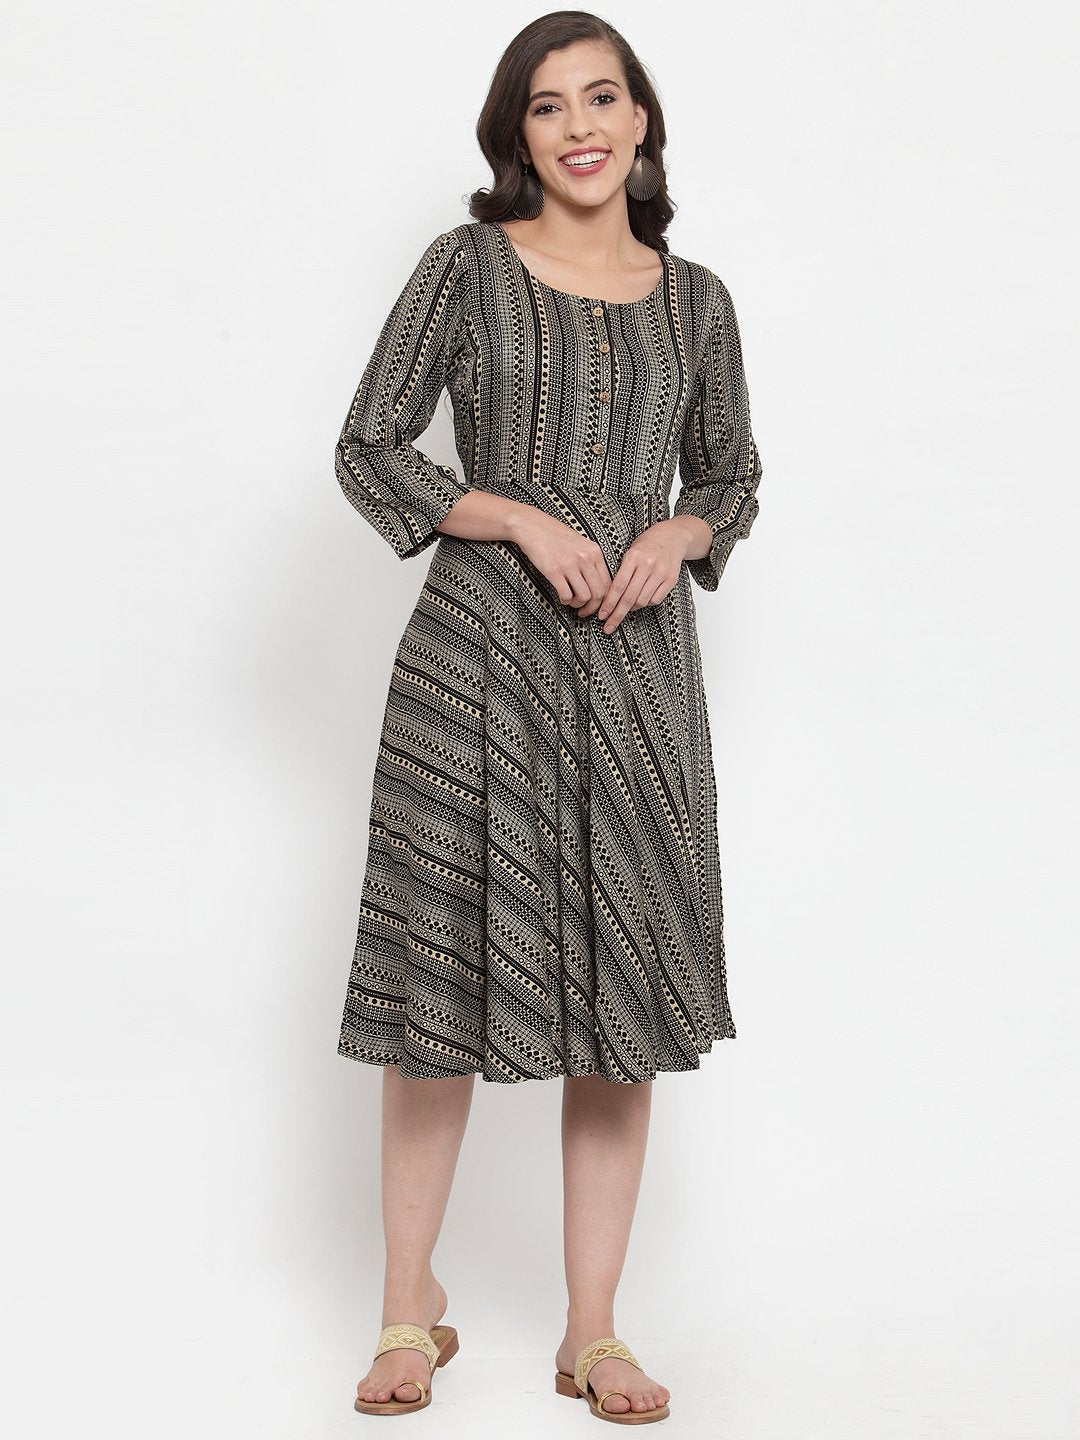 Women's Black Printed Fit and Flare Ethnic Dress - Jompers